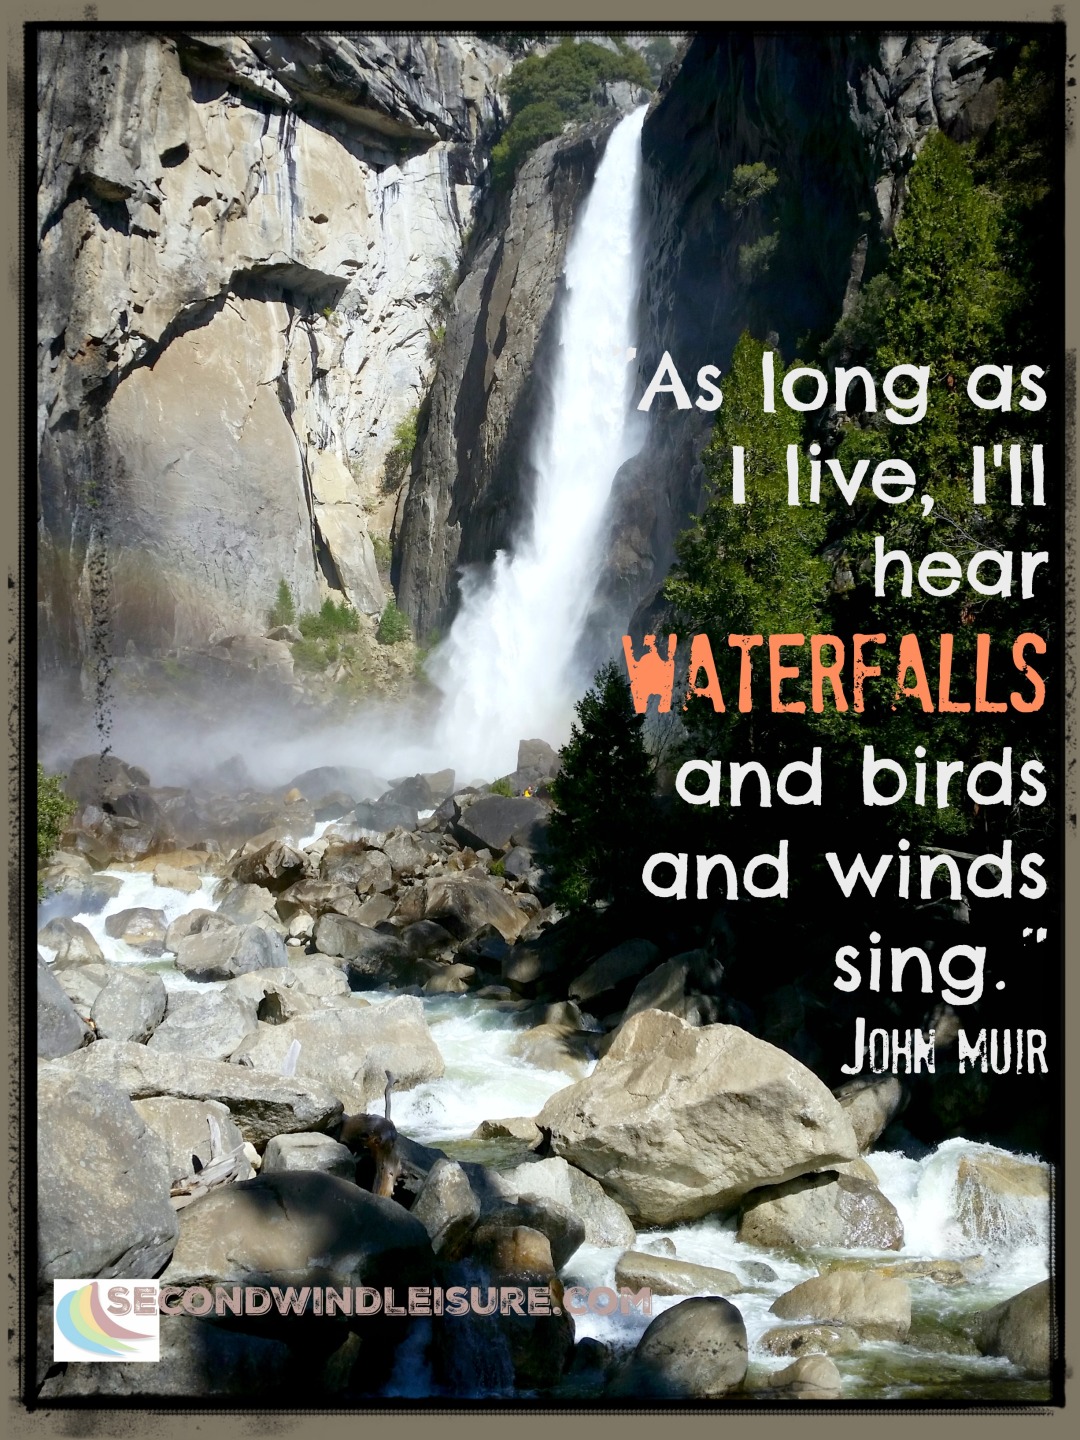 "As long as I live, I'll hear waterfalls and birds and winds sing." John Muir